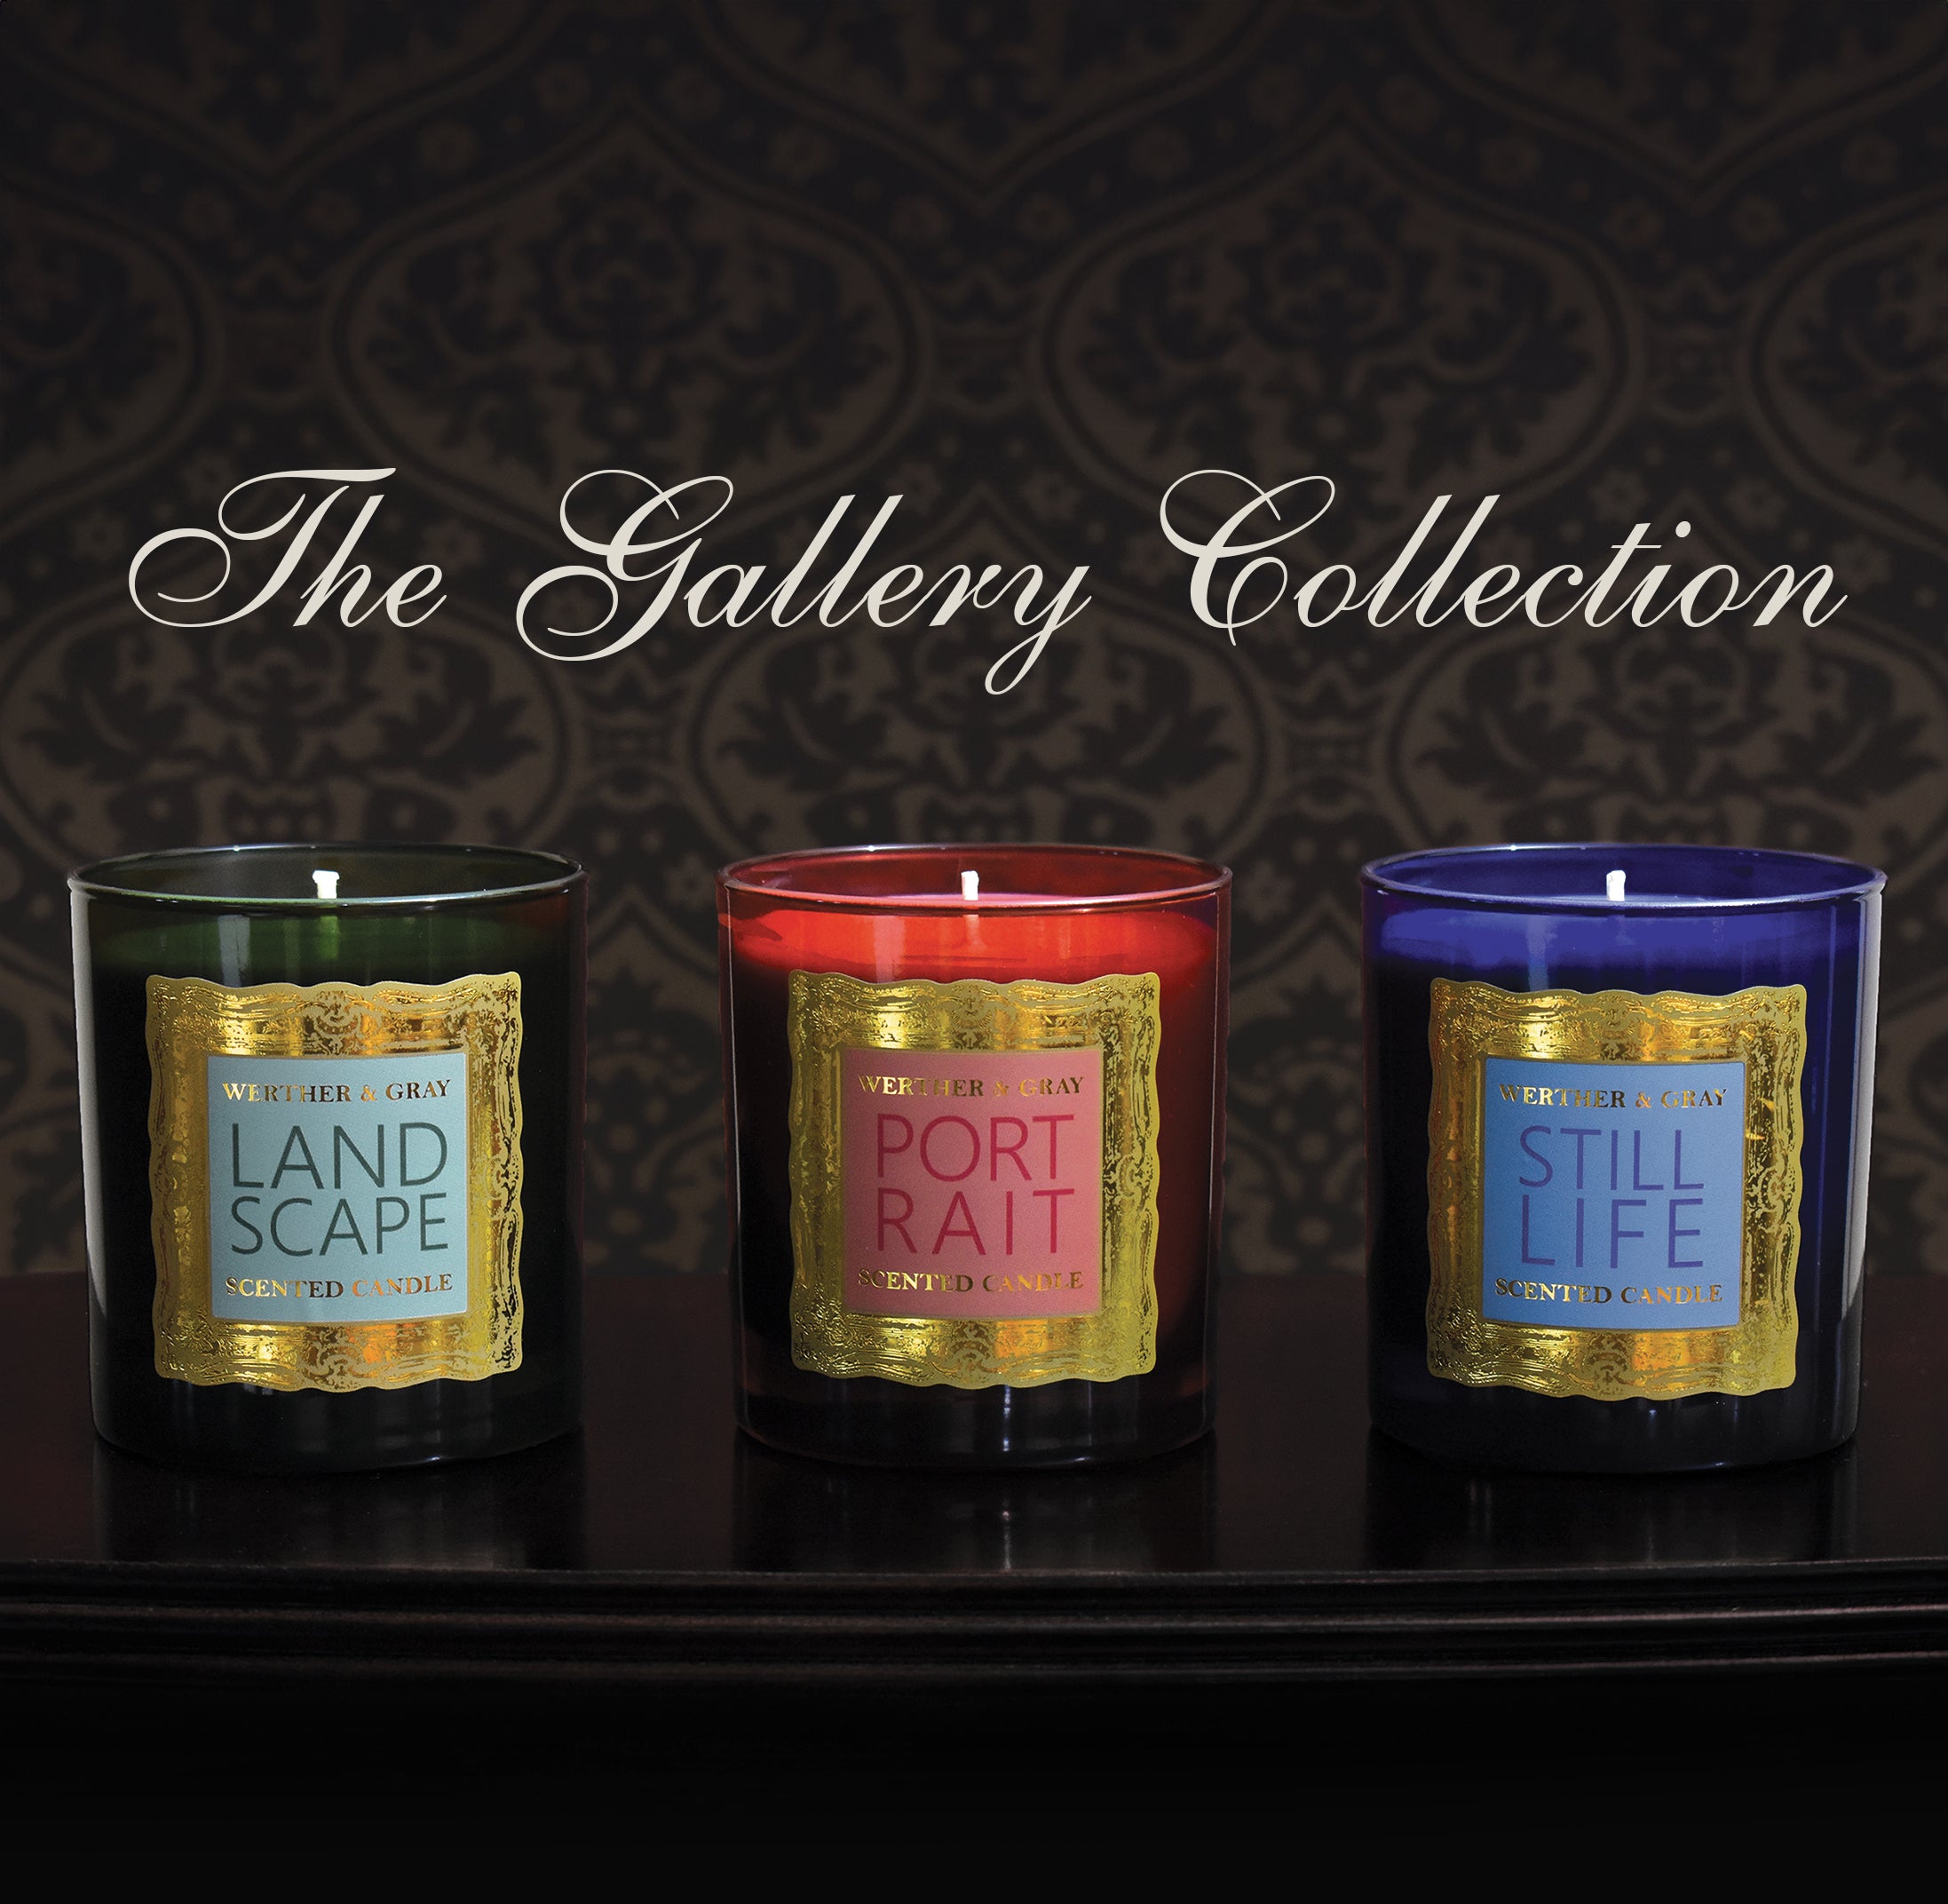 The Gallery Collection, three scented candles: Landscape, Portrait, and Still Life